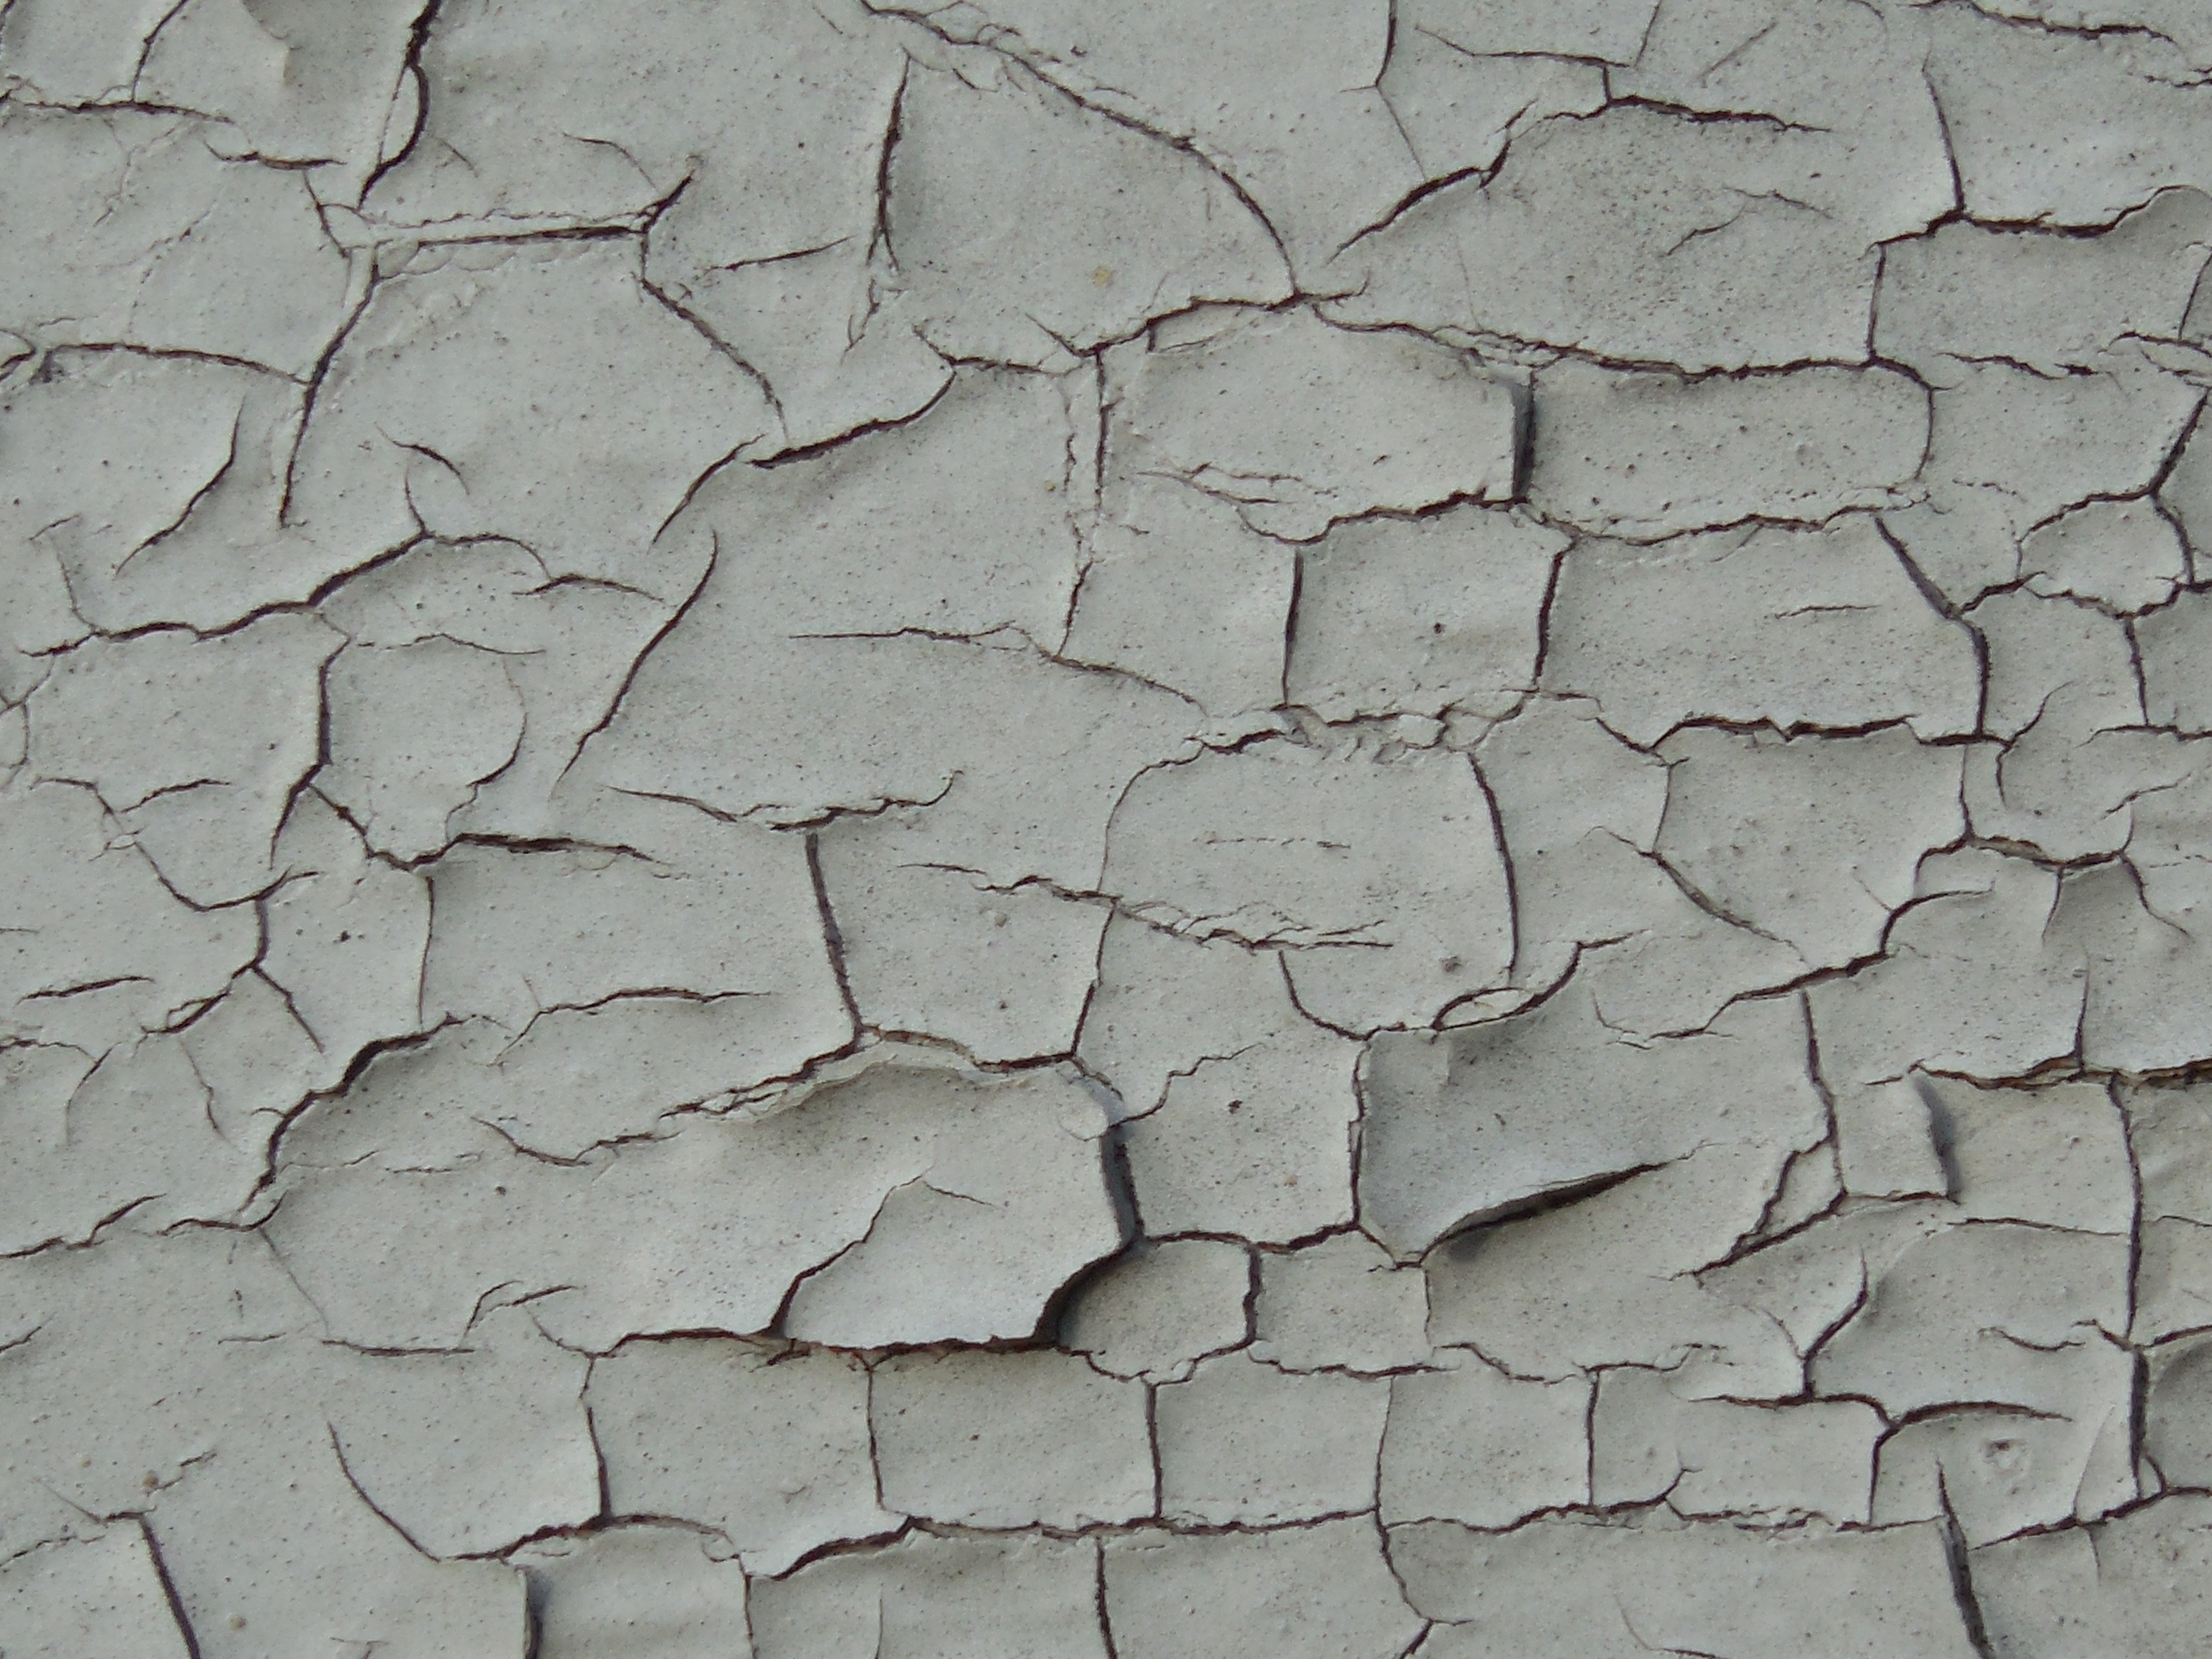 Chipped cracked wall free image